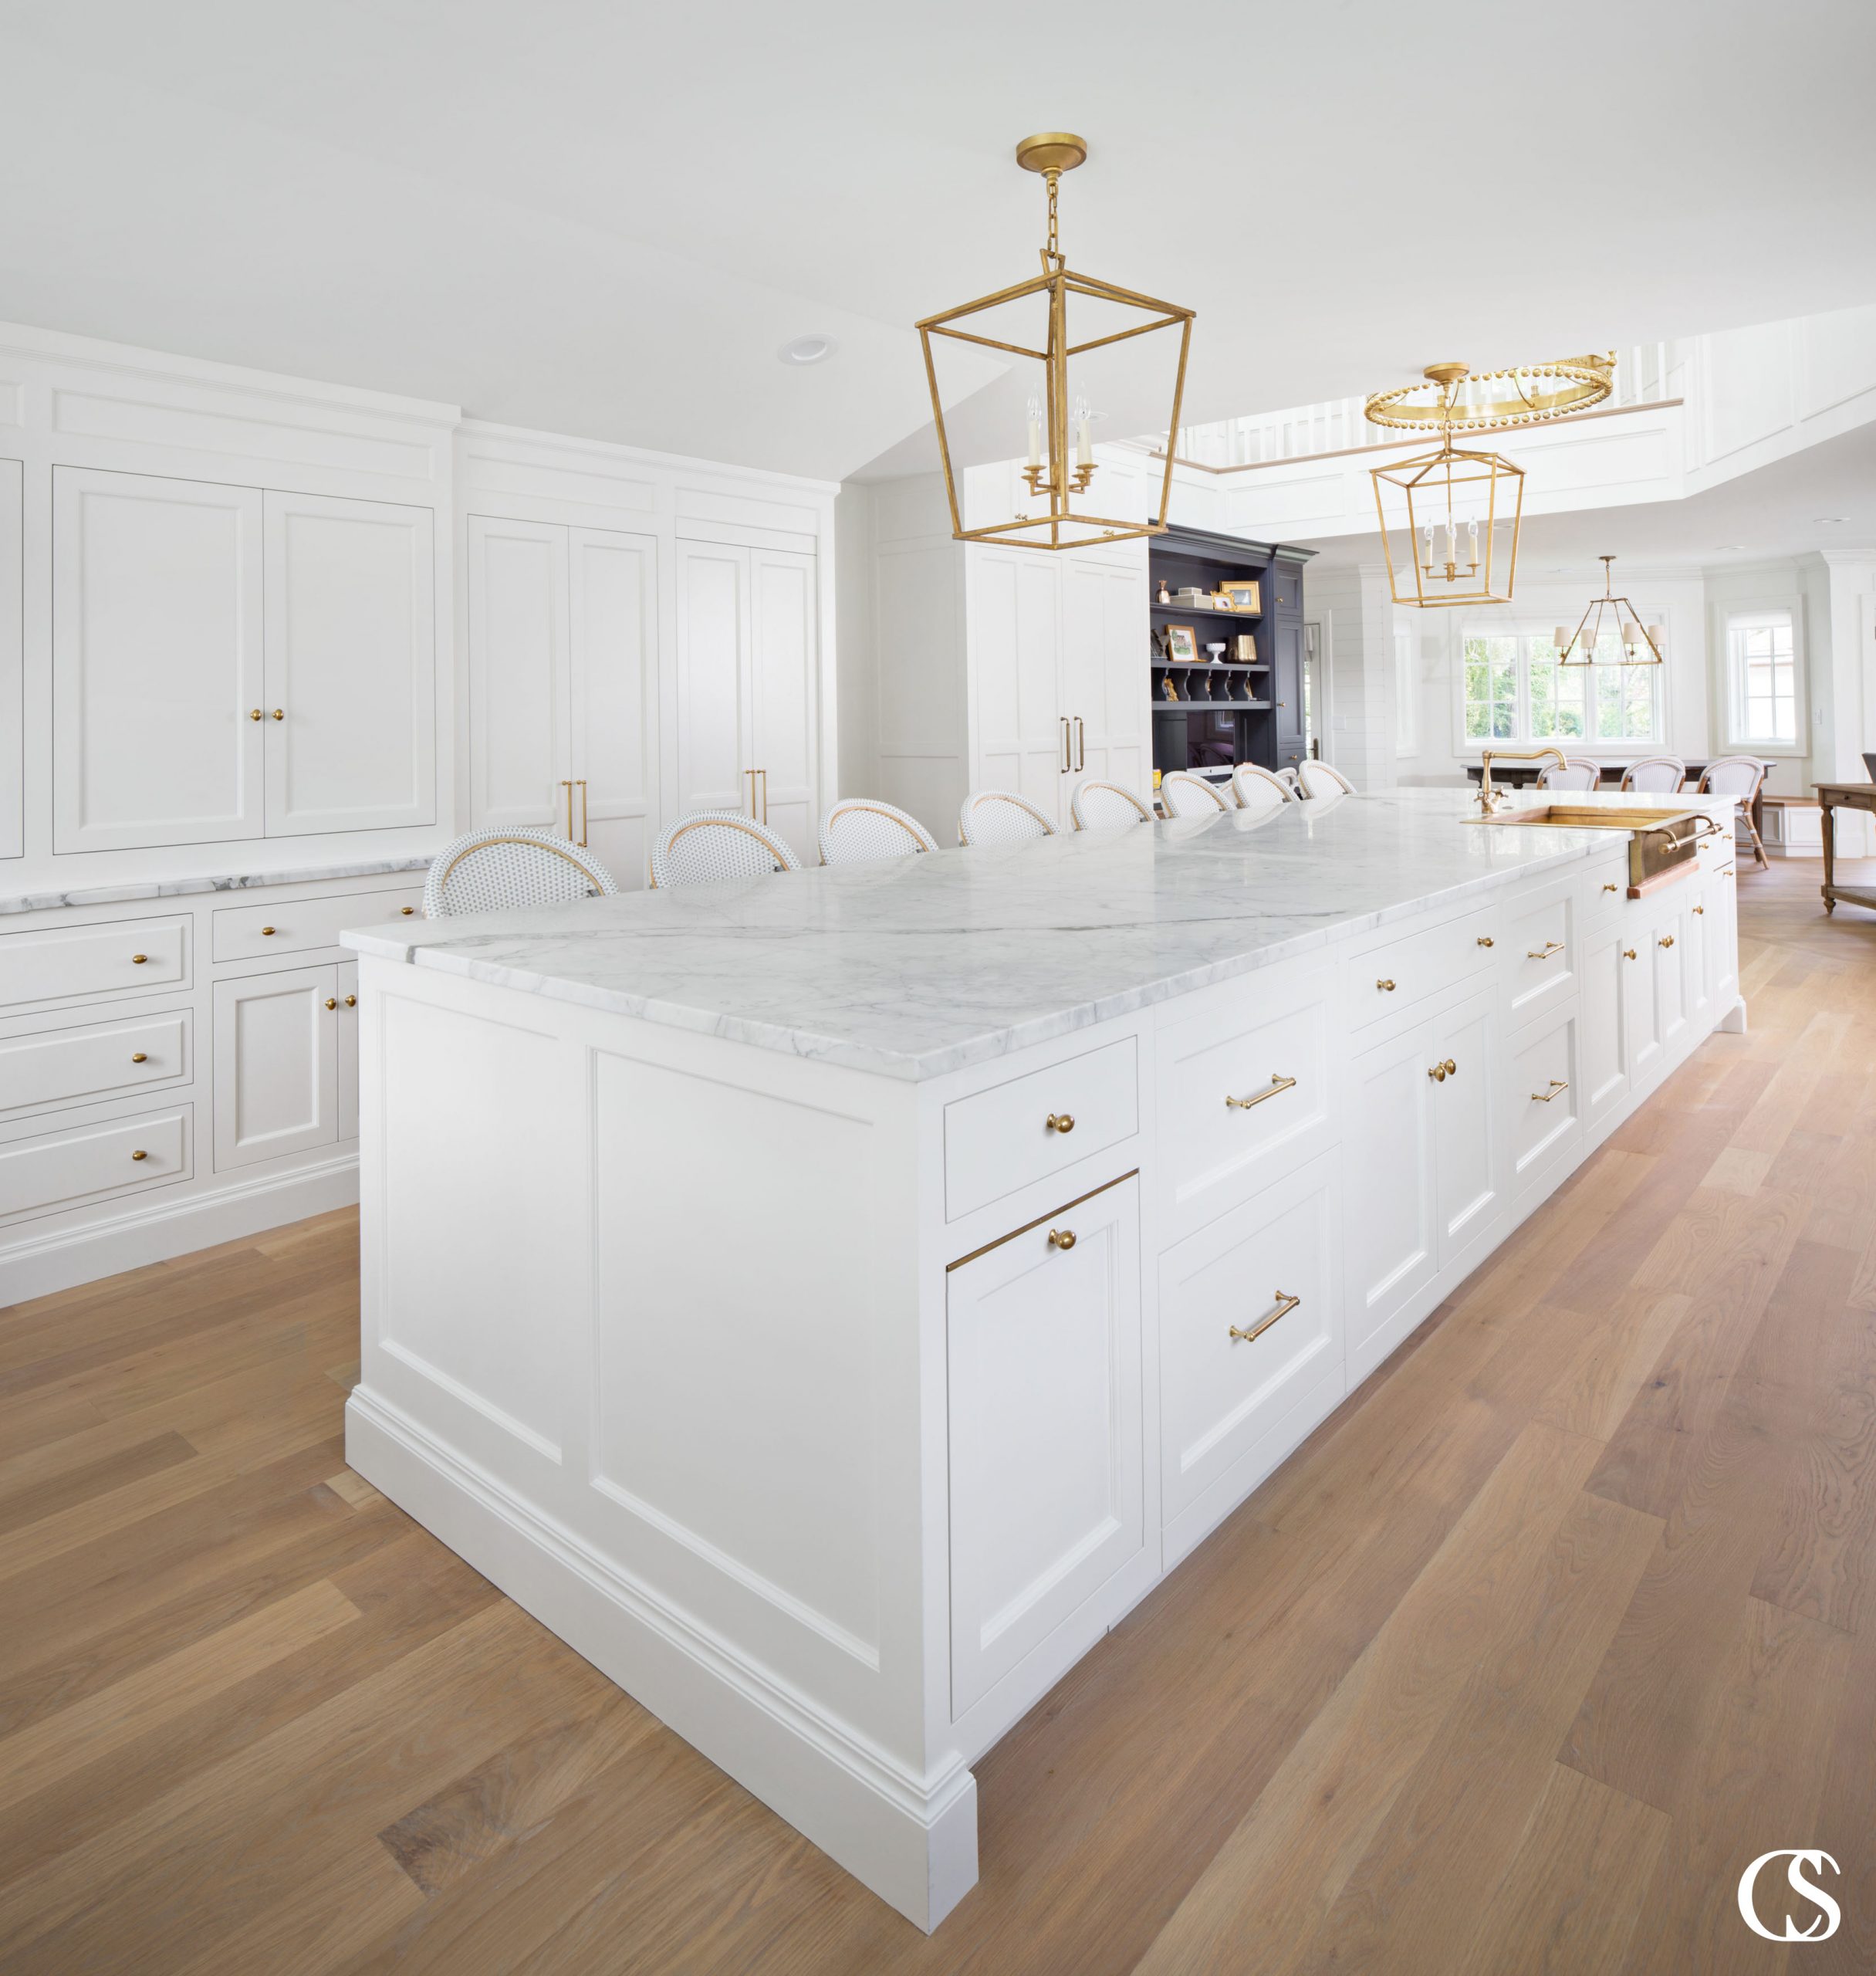 This white kitchen island design is large enough to comfortably seat 8 people which means it also has plenty of room for cooking, entertaining, and storage.